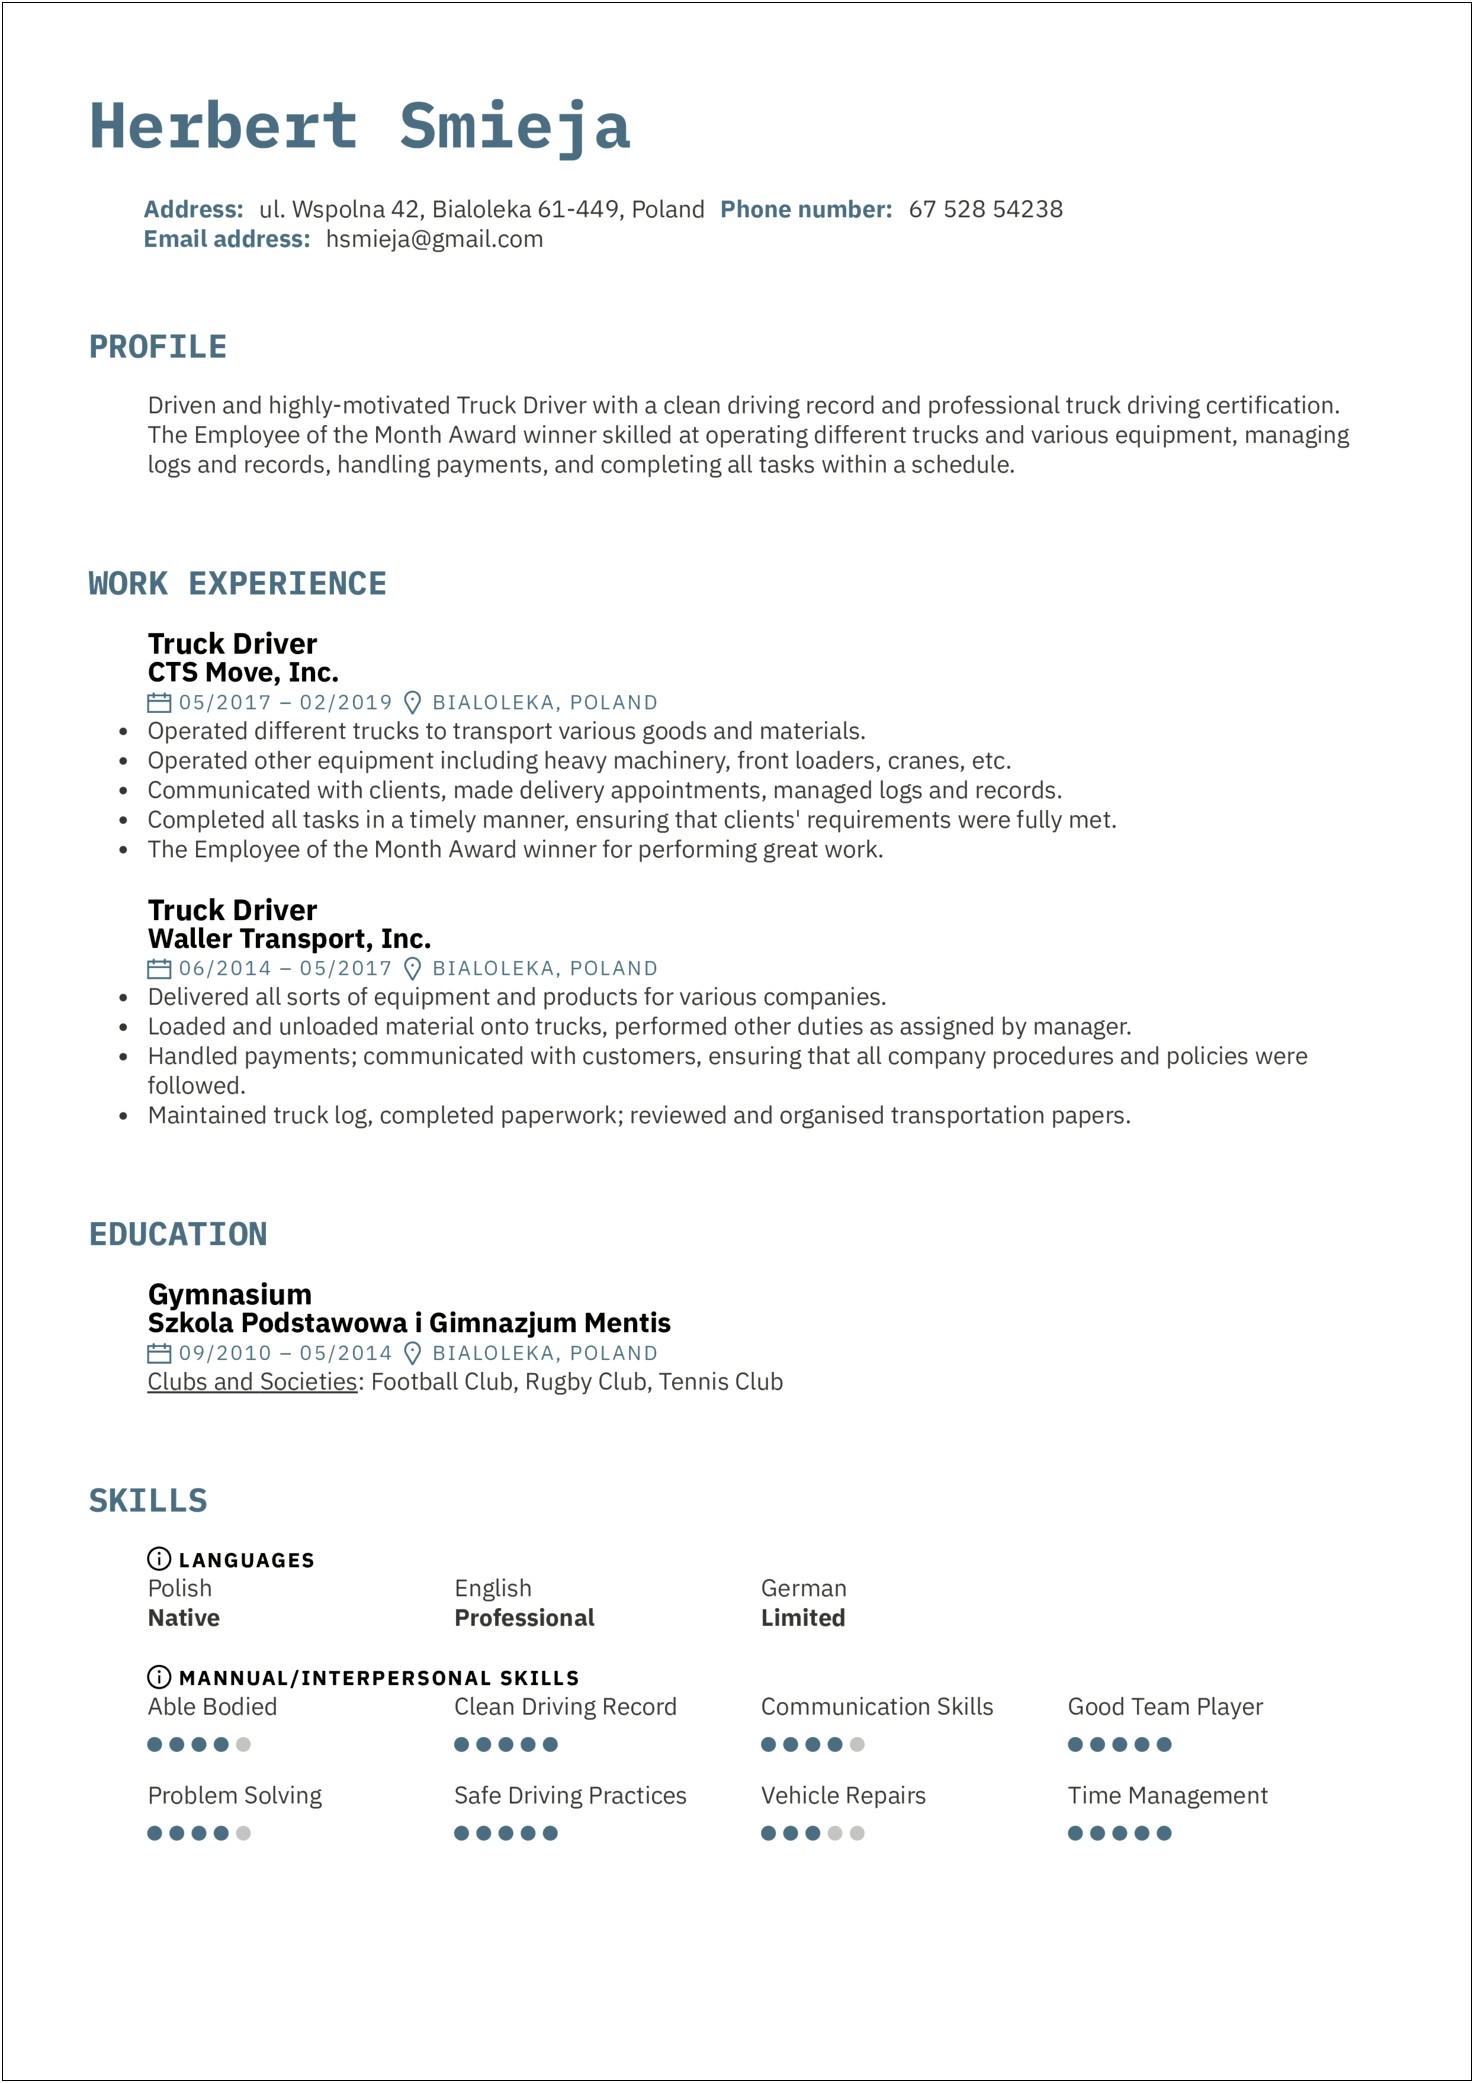 Professional Driving Skills For Resume